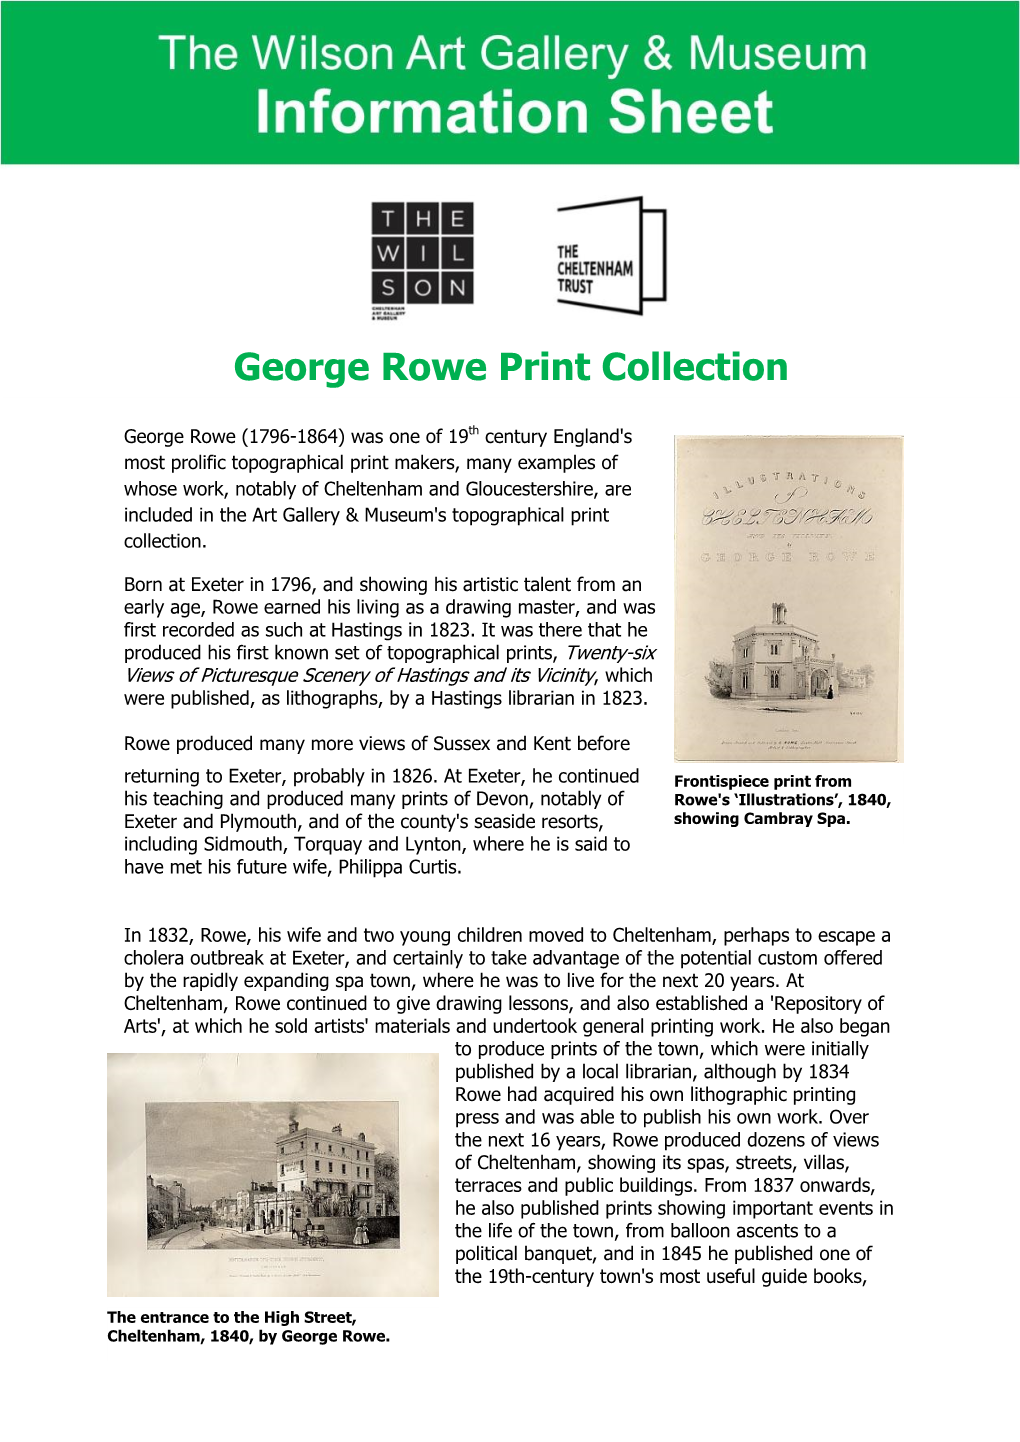 George Rowe Print Collection